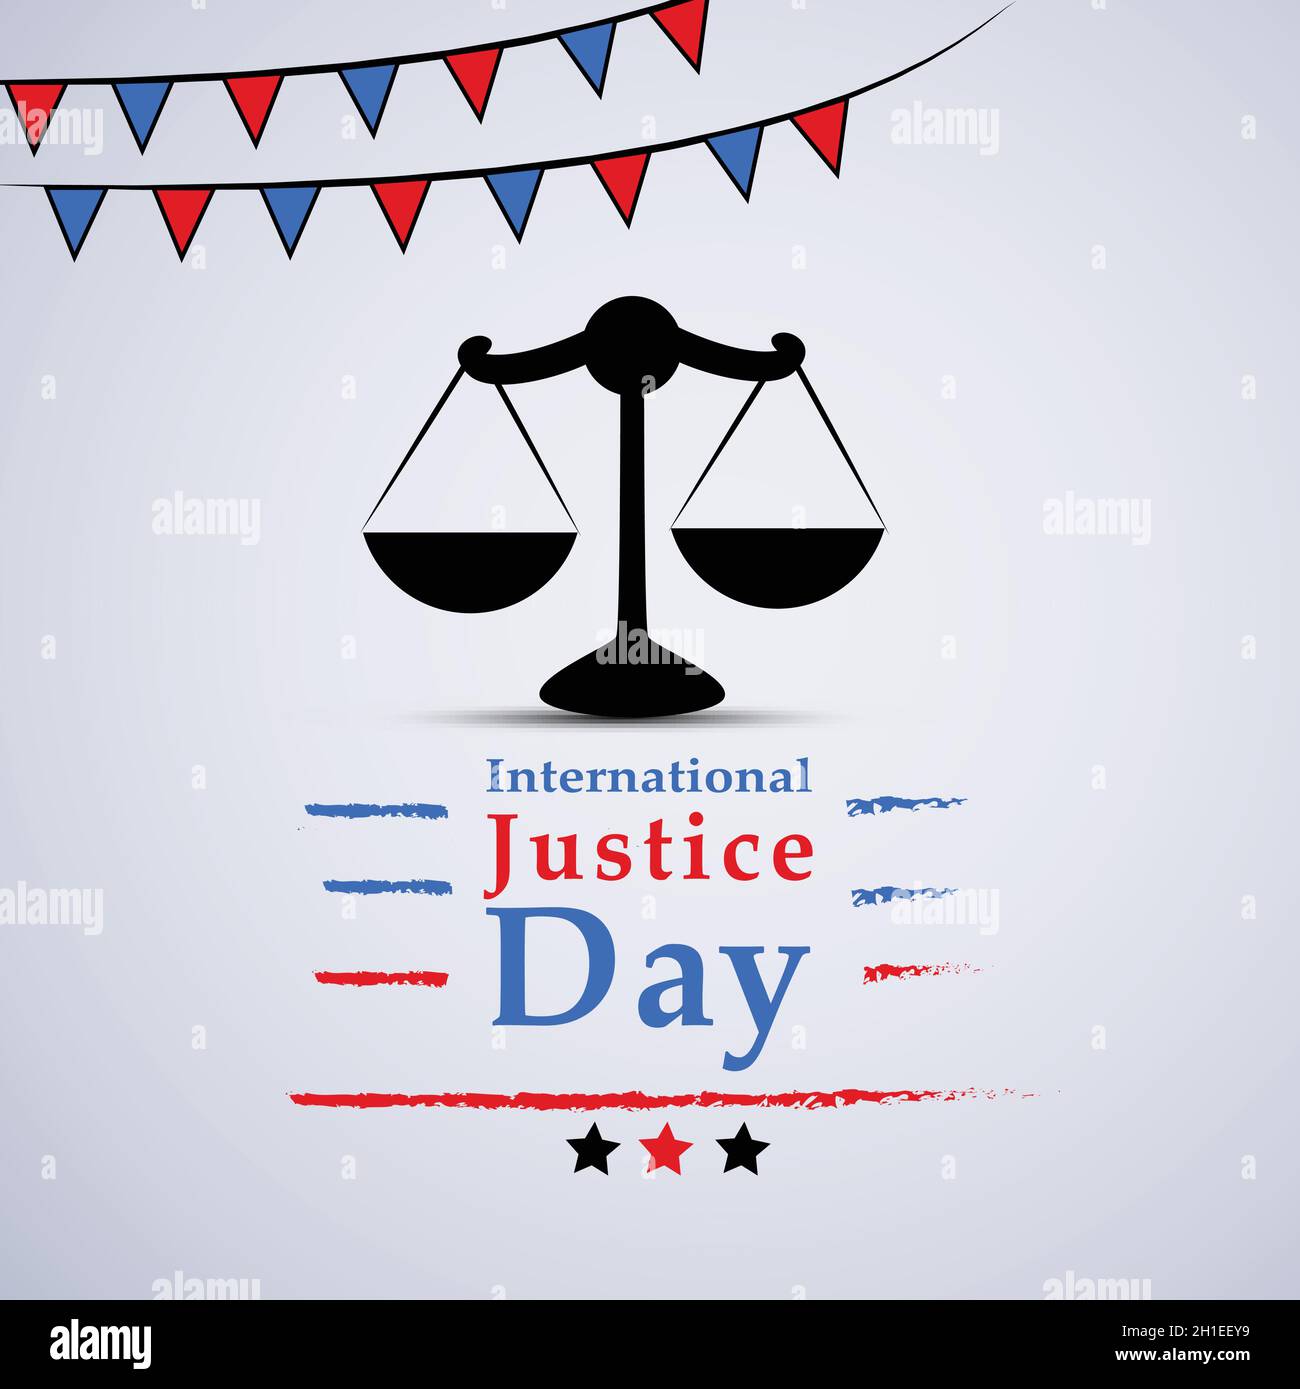 International Justice day background Stock Vector